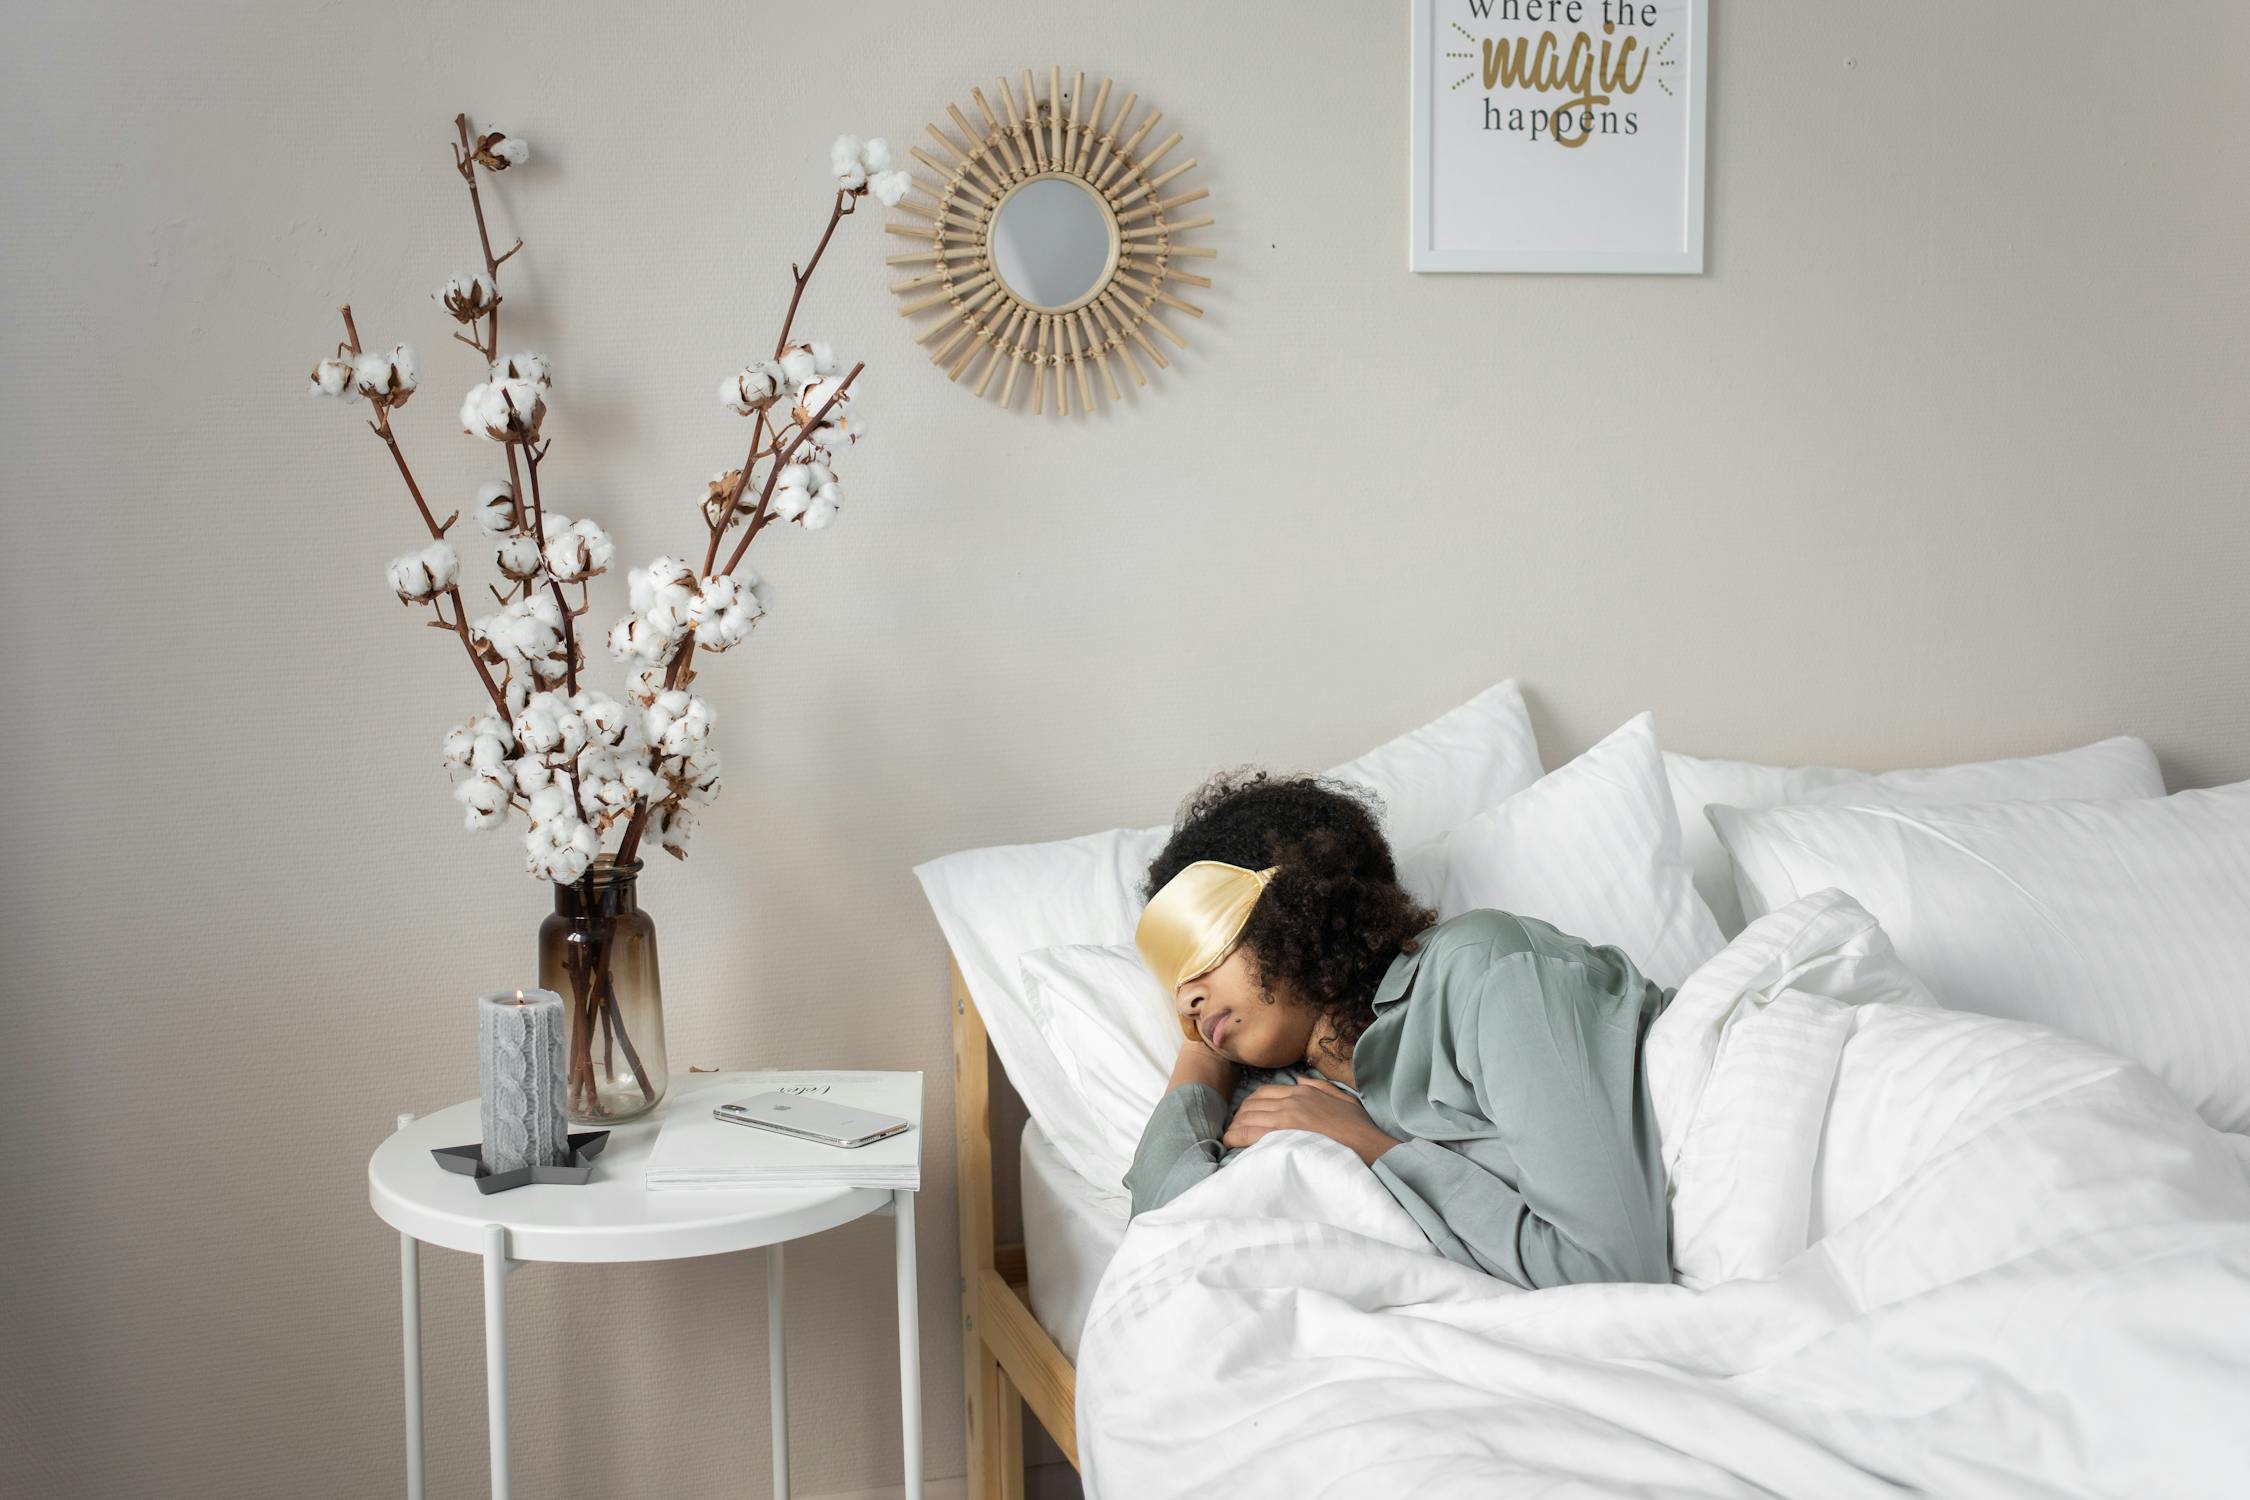 Image of a woman sleeping soundly